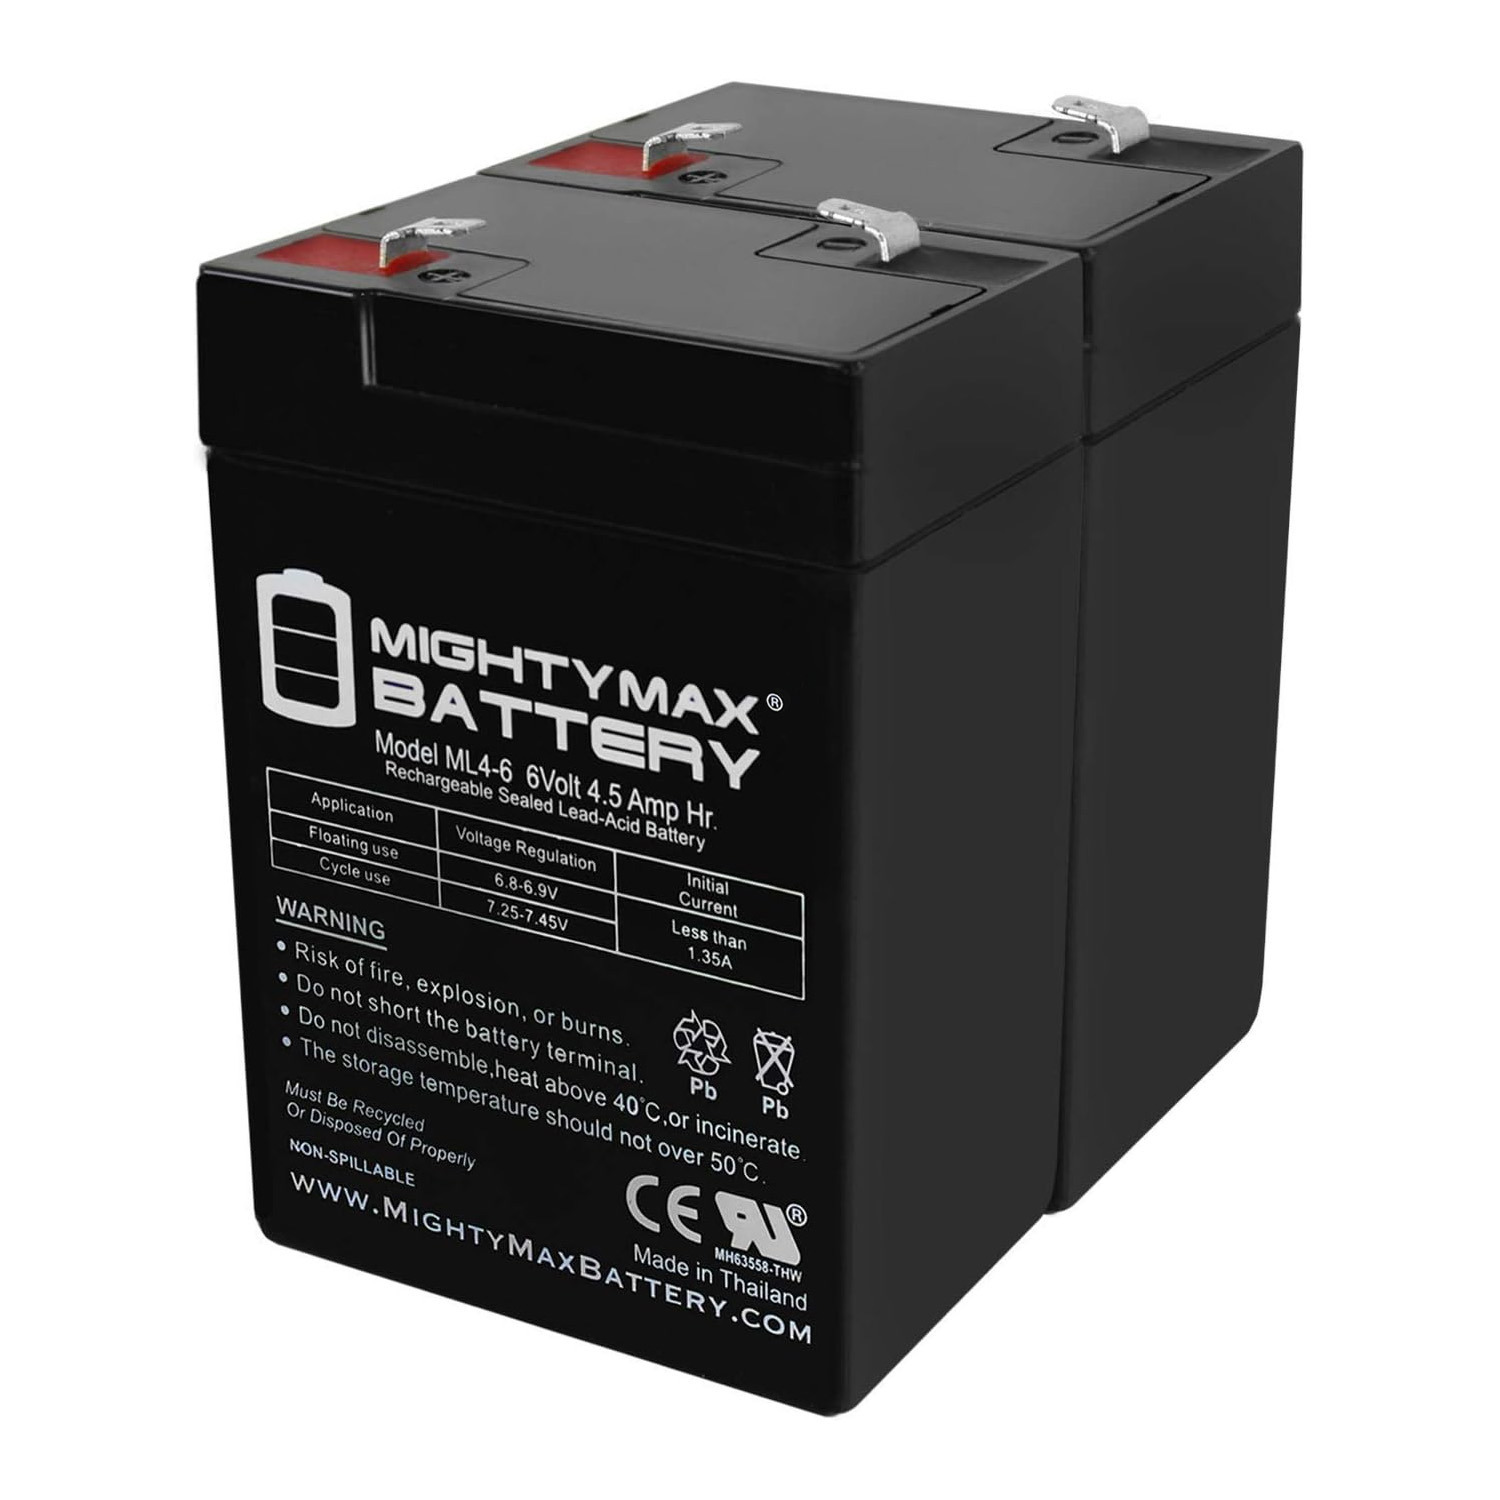 6V 4.5AH Replacement Battery for Sho-Me 09.0985 - 2 Pack